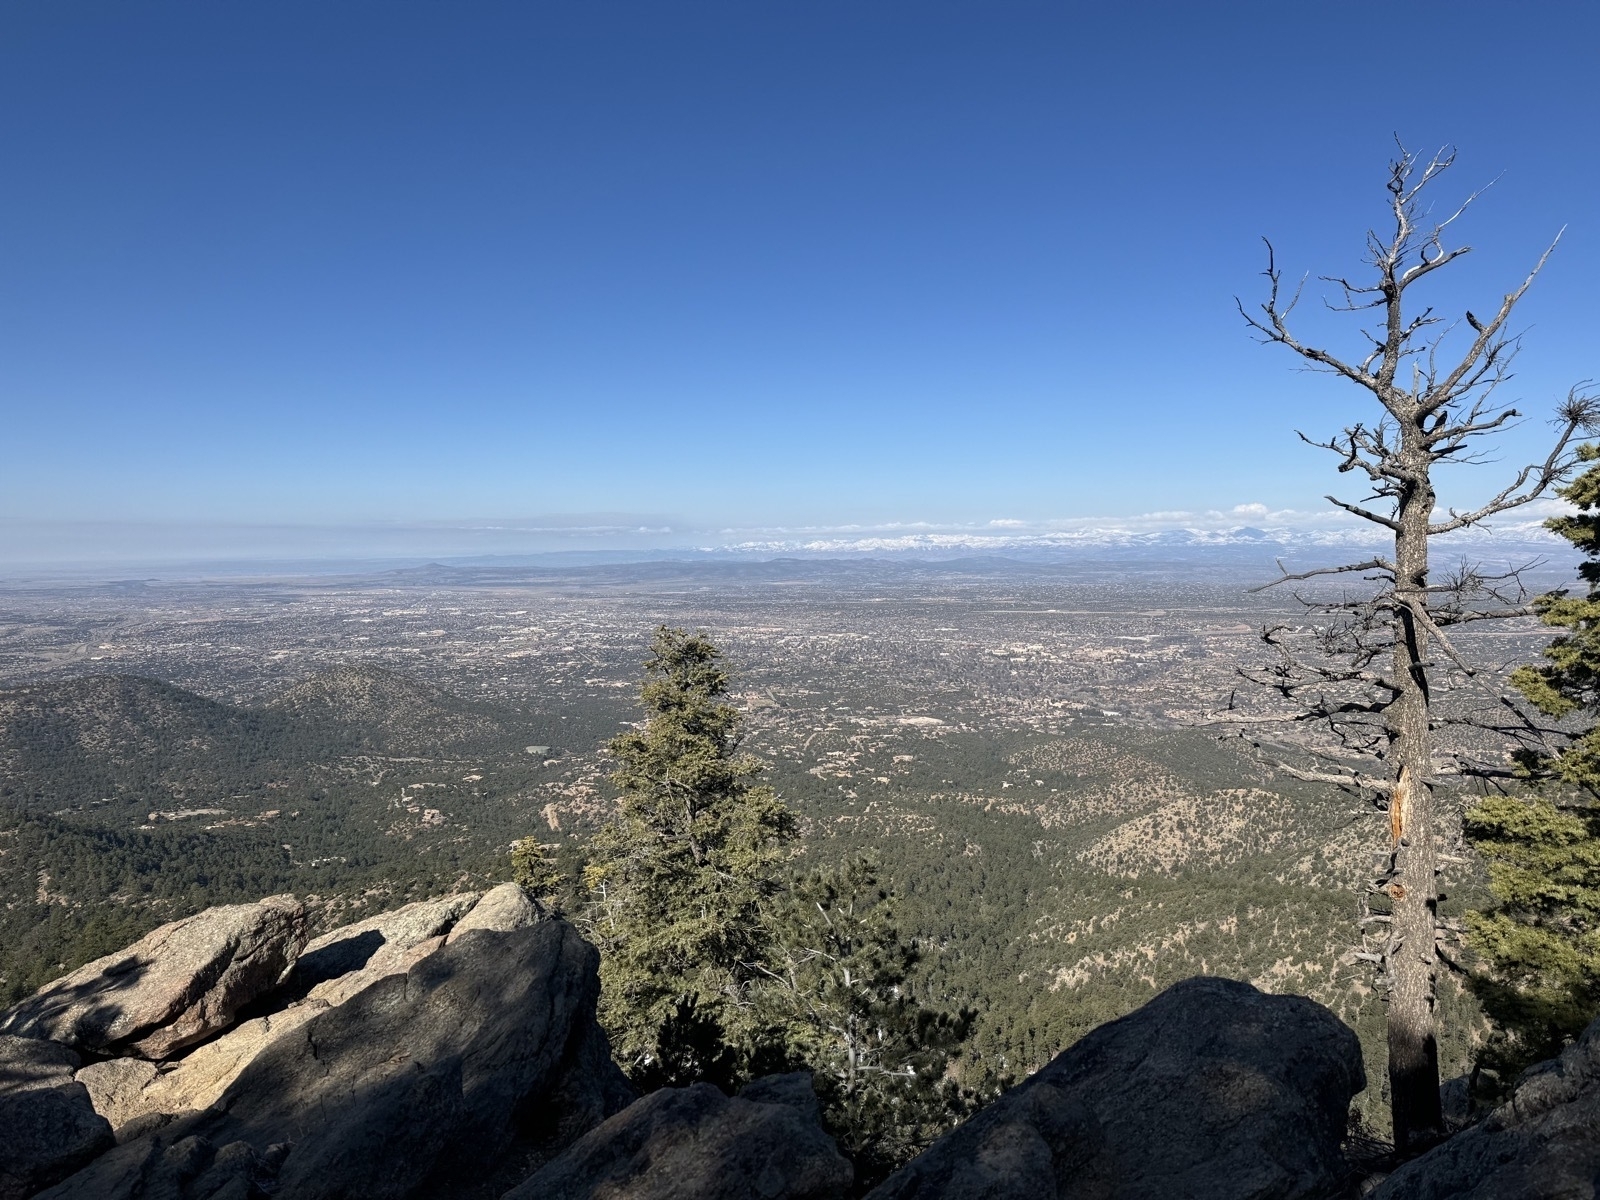 View from mountain peak with rocks and trees in foreground and city of Santa Fe below with snow-covered Jemez mountain range in distant background